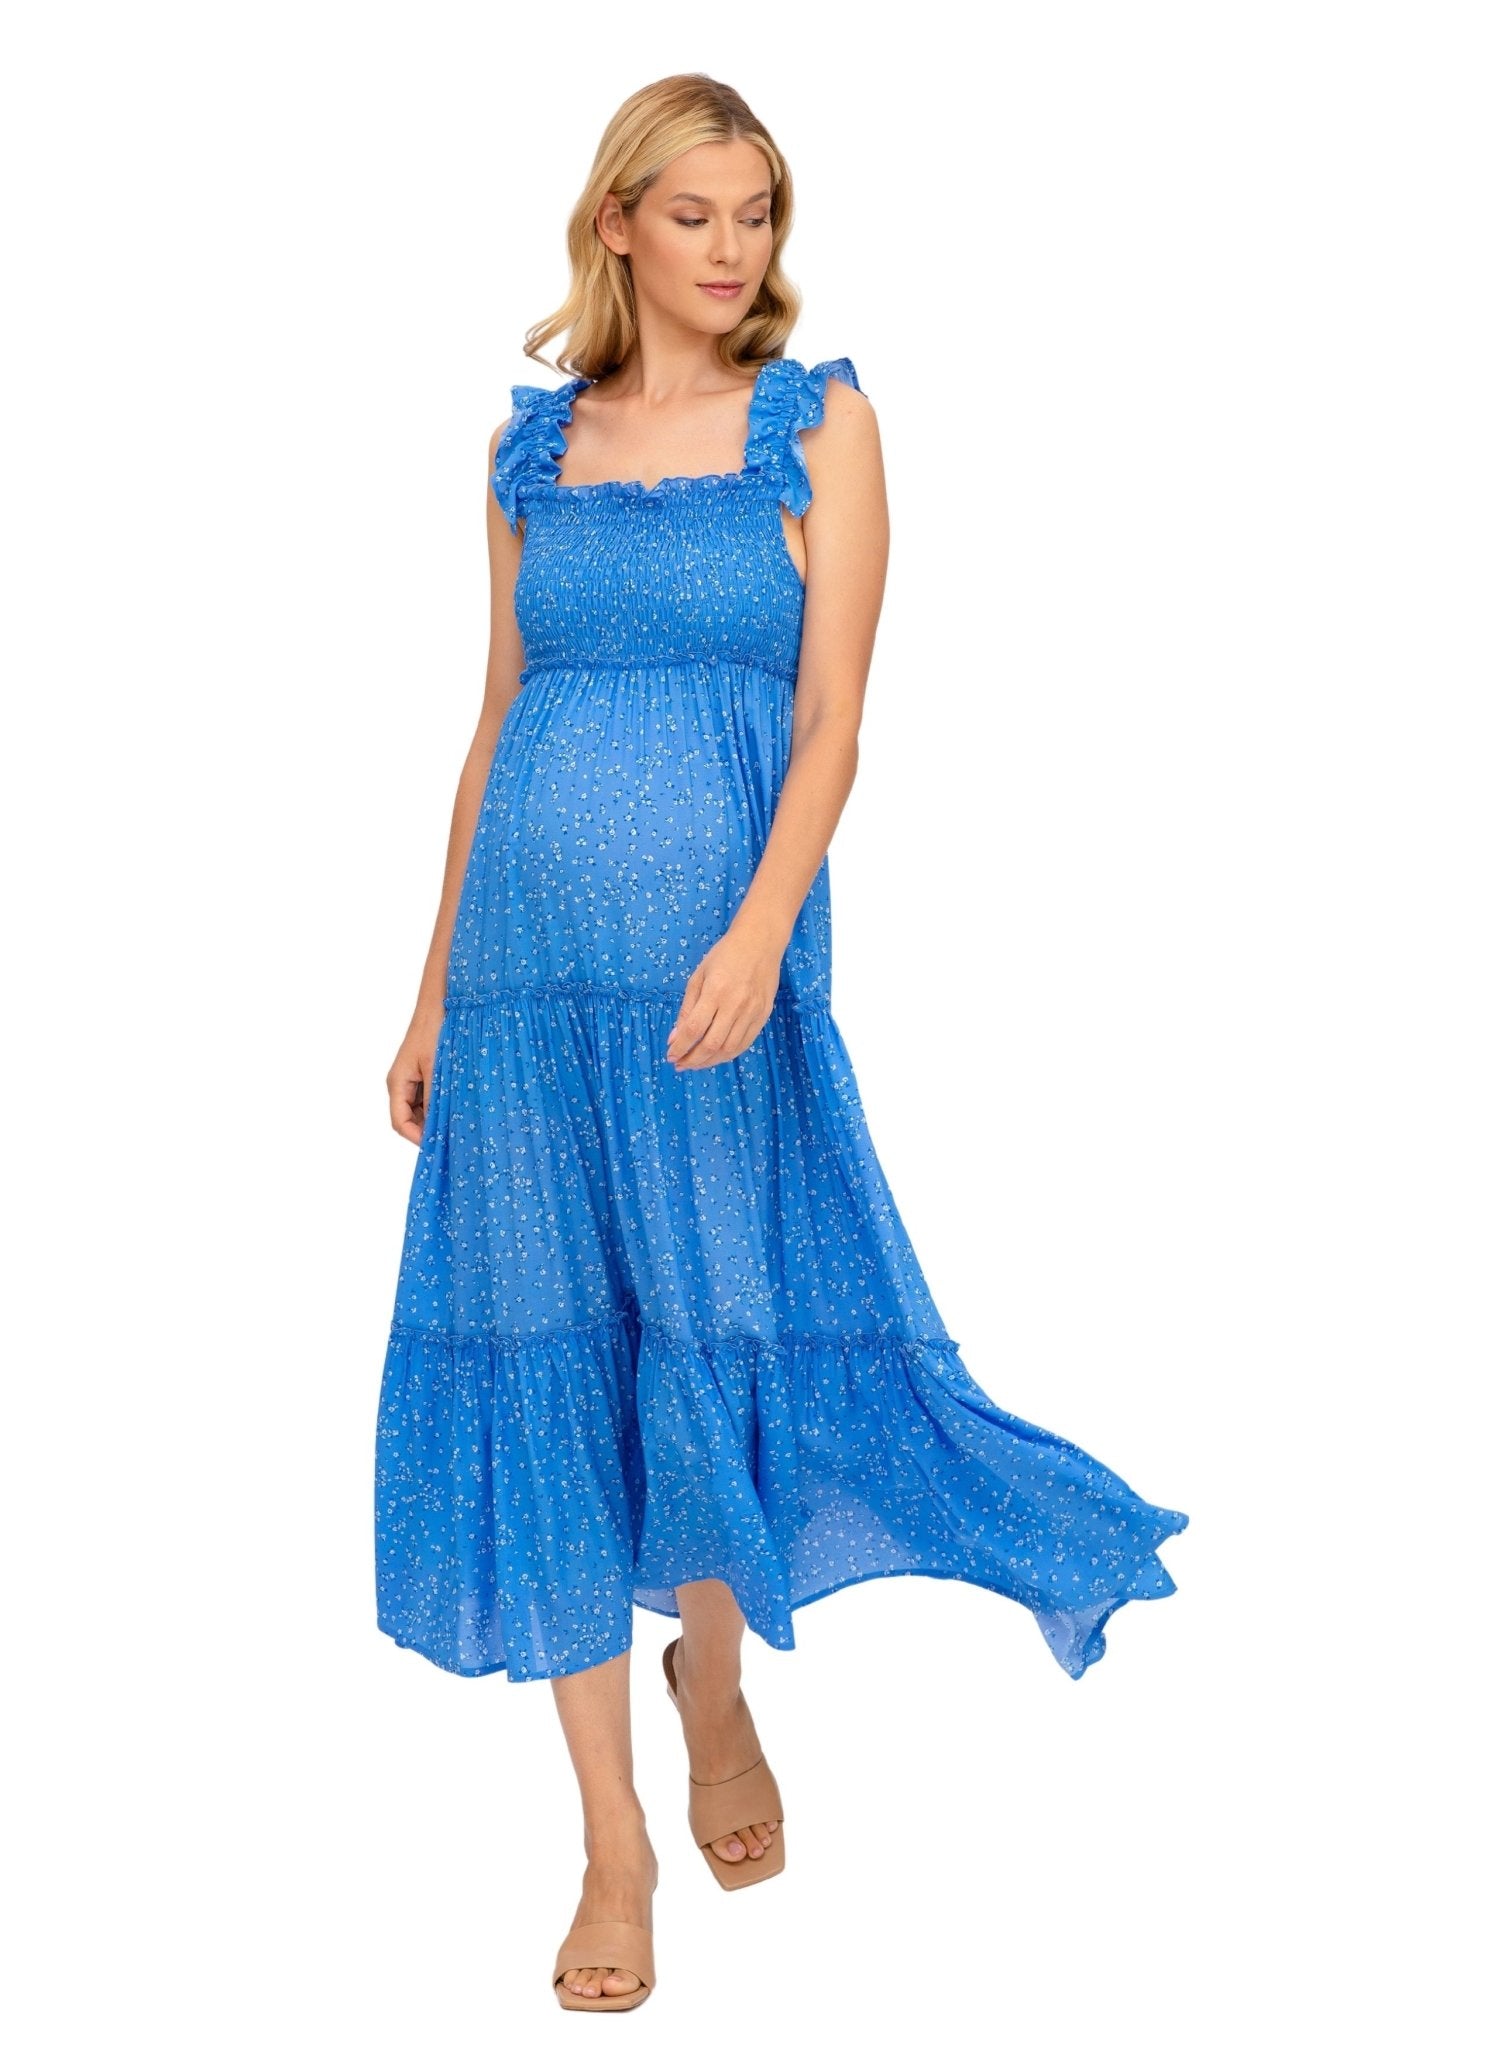 Chloe Long Maternity Dress - Blue Cottage - Mums and Bumps